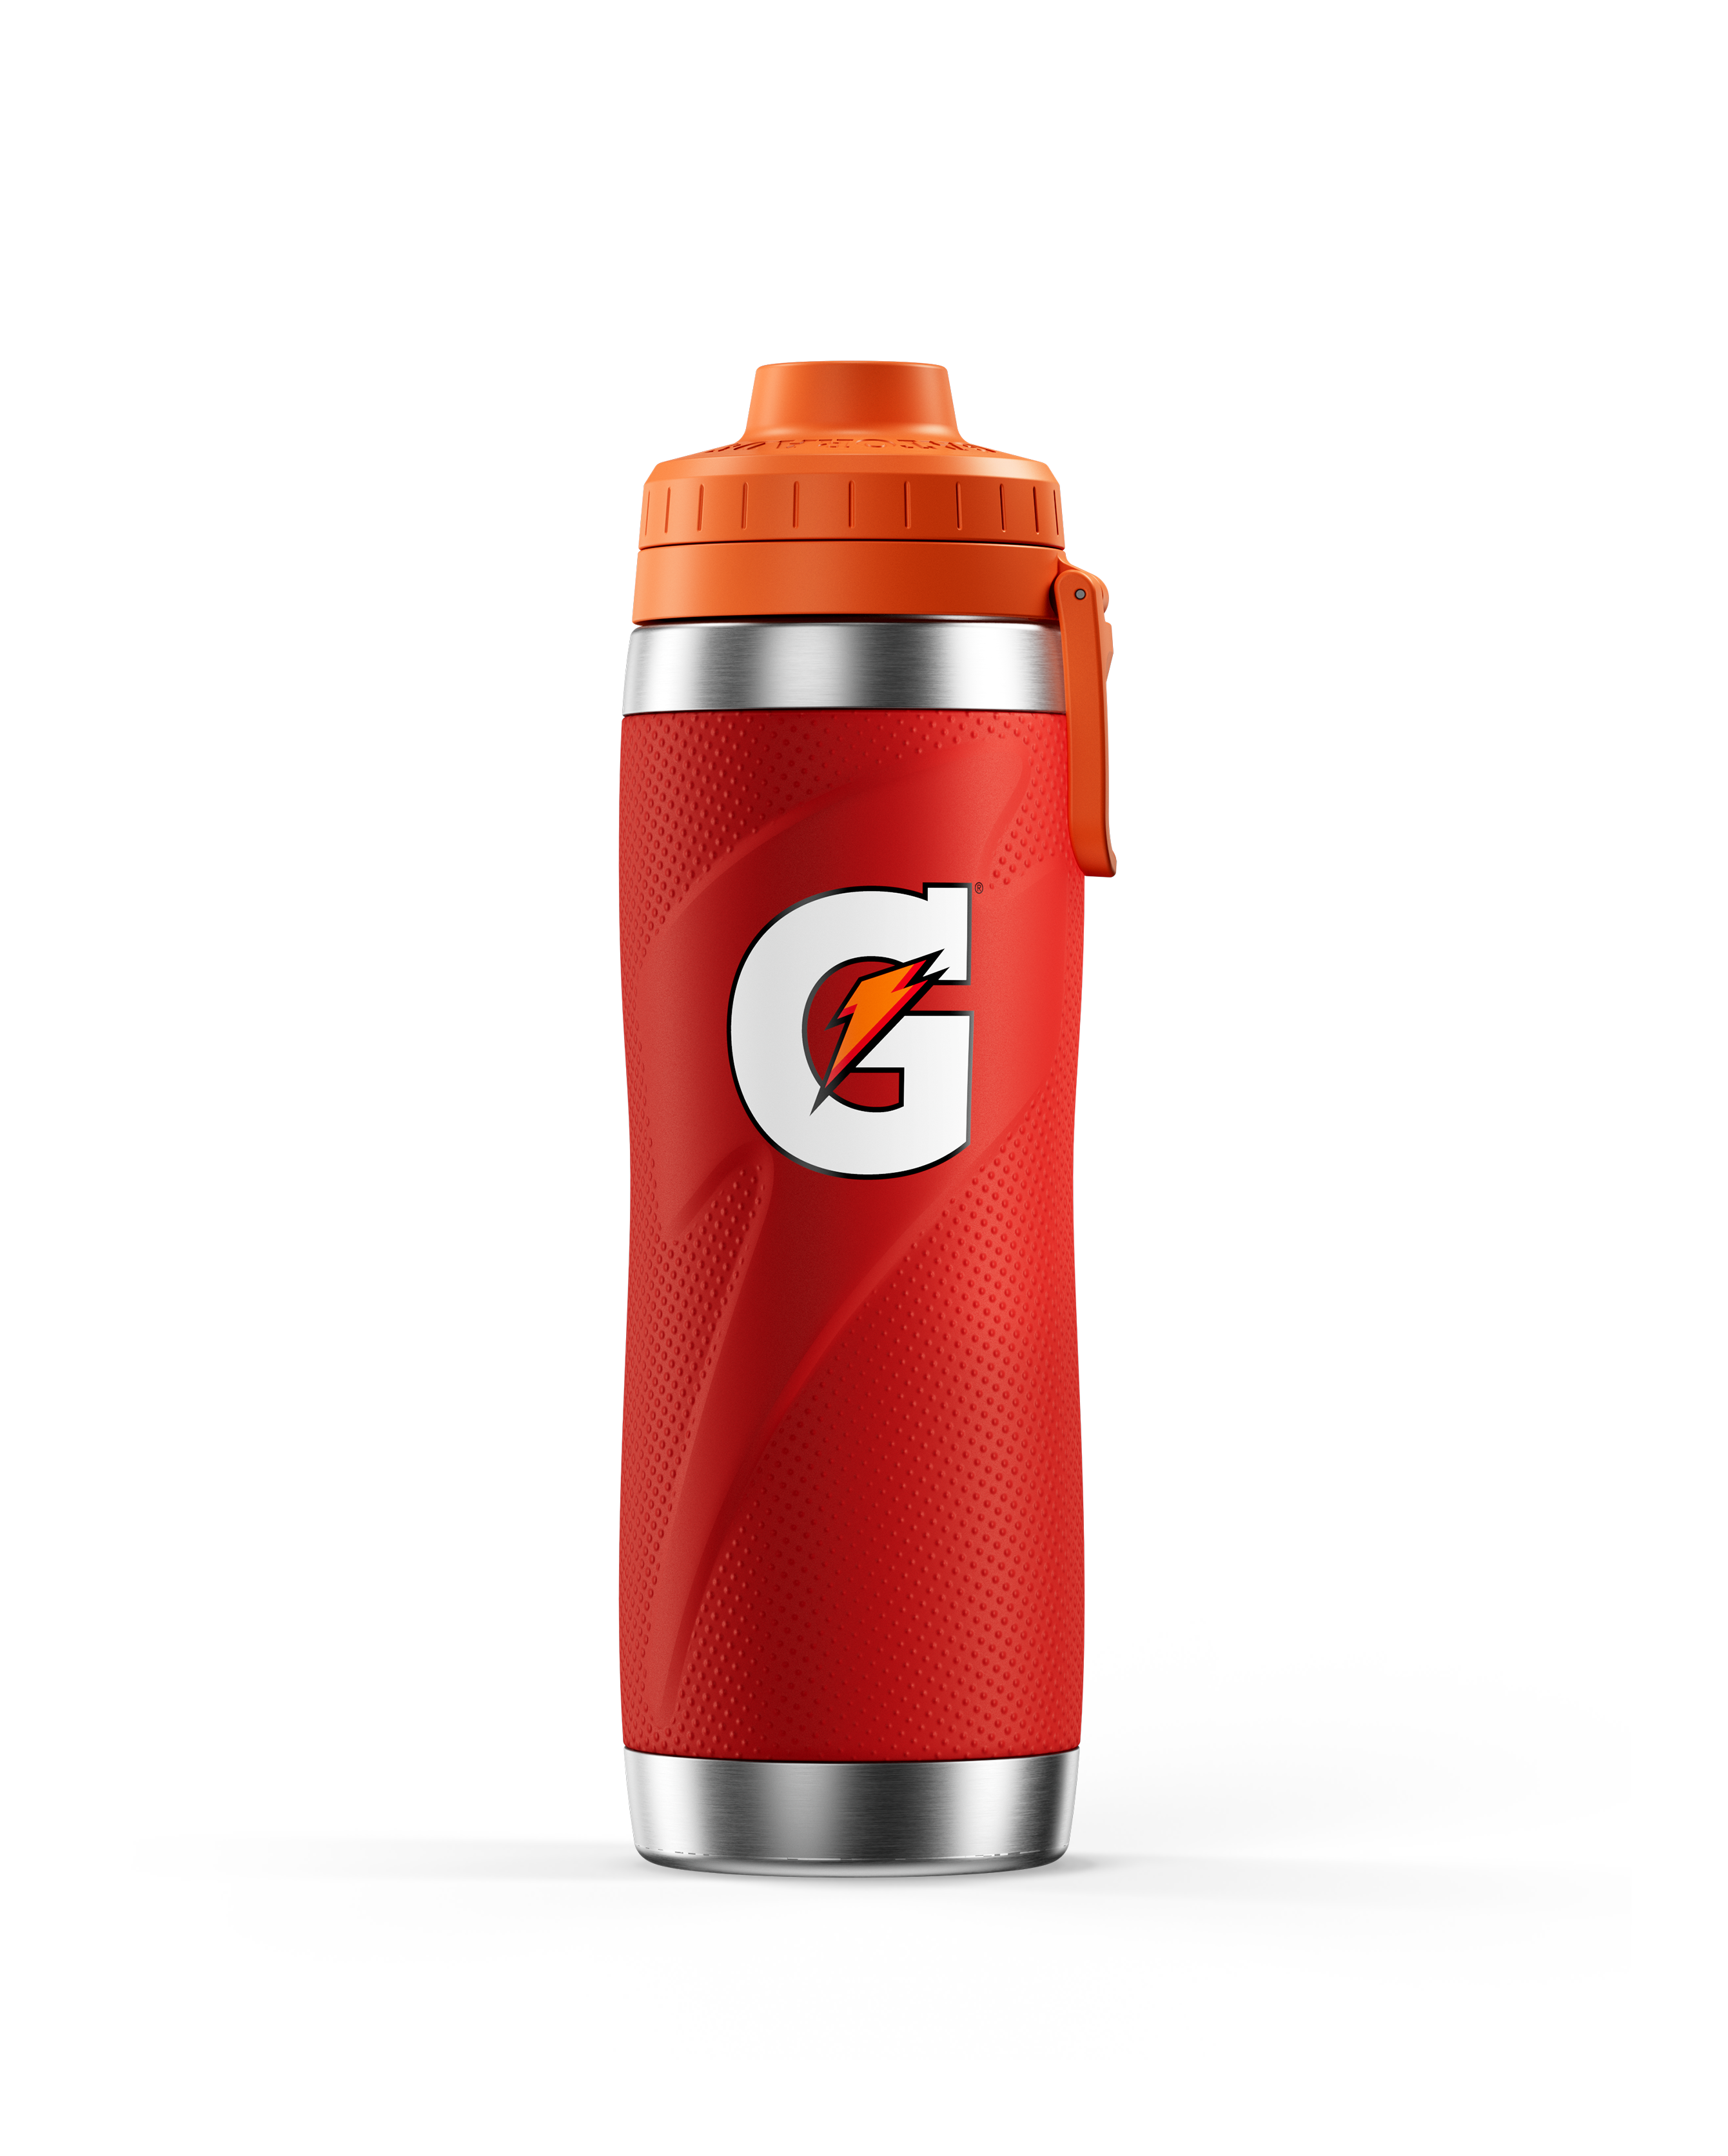 G Stainless Steel Bottle Red Product Tile